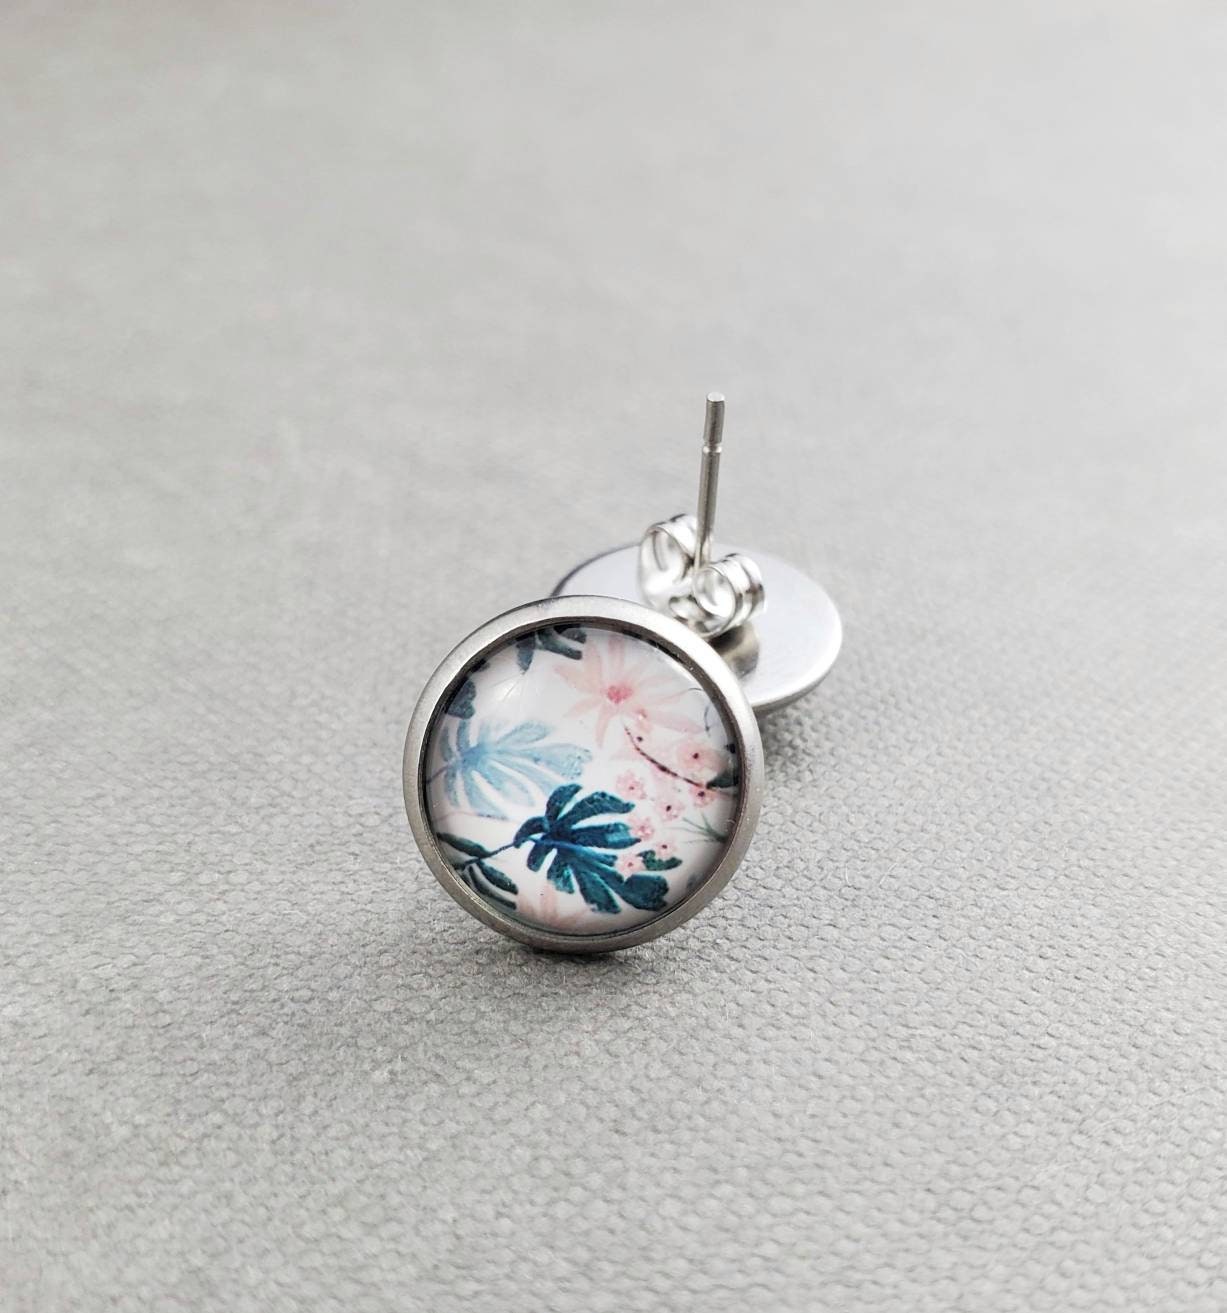 Tropical Floral Stud Earrings, Hypoallergenic Stainless Steel Posts, Glass Cabochon Jewelry. Gift for Her